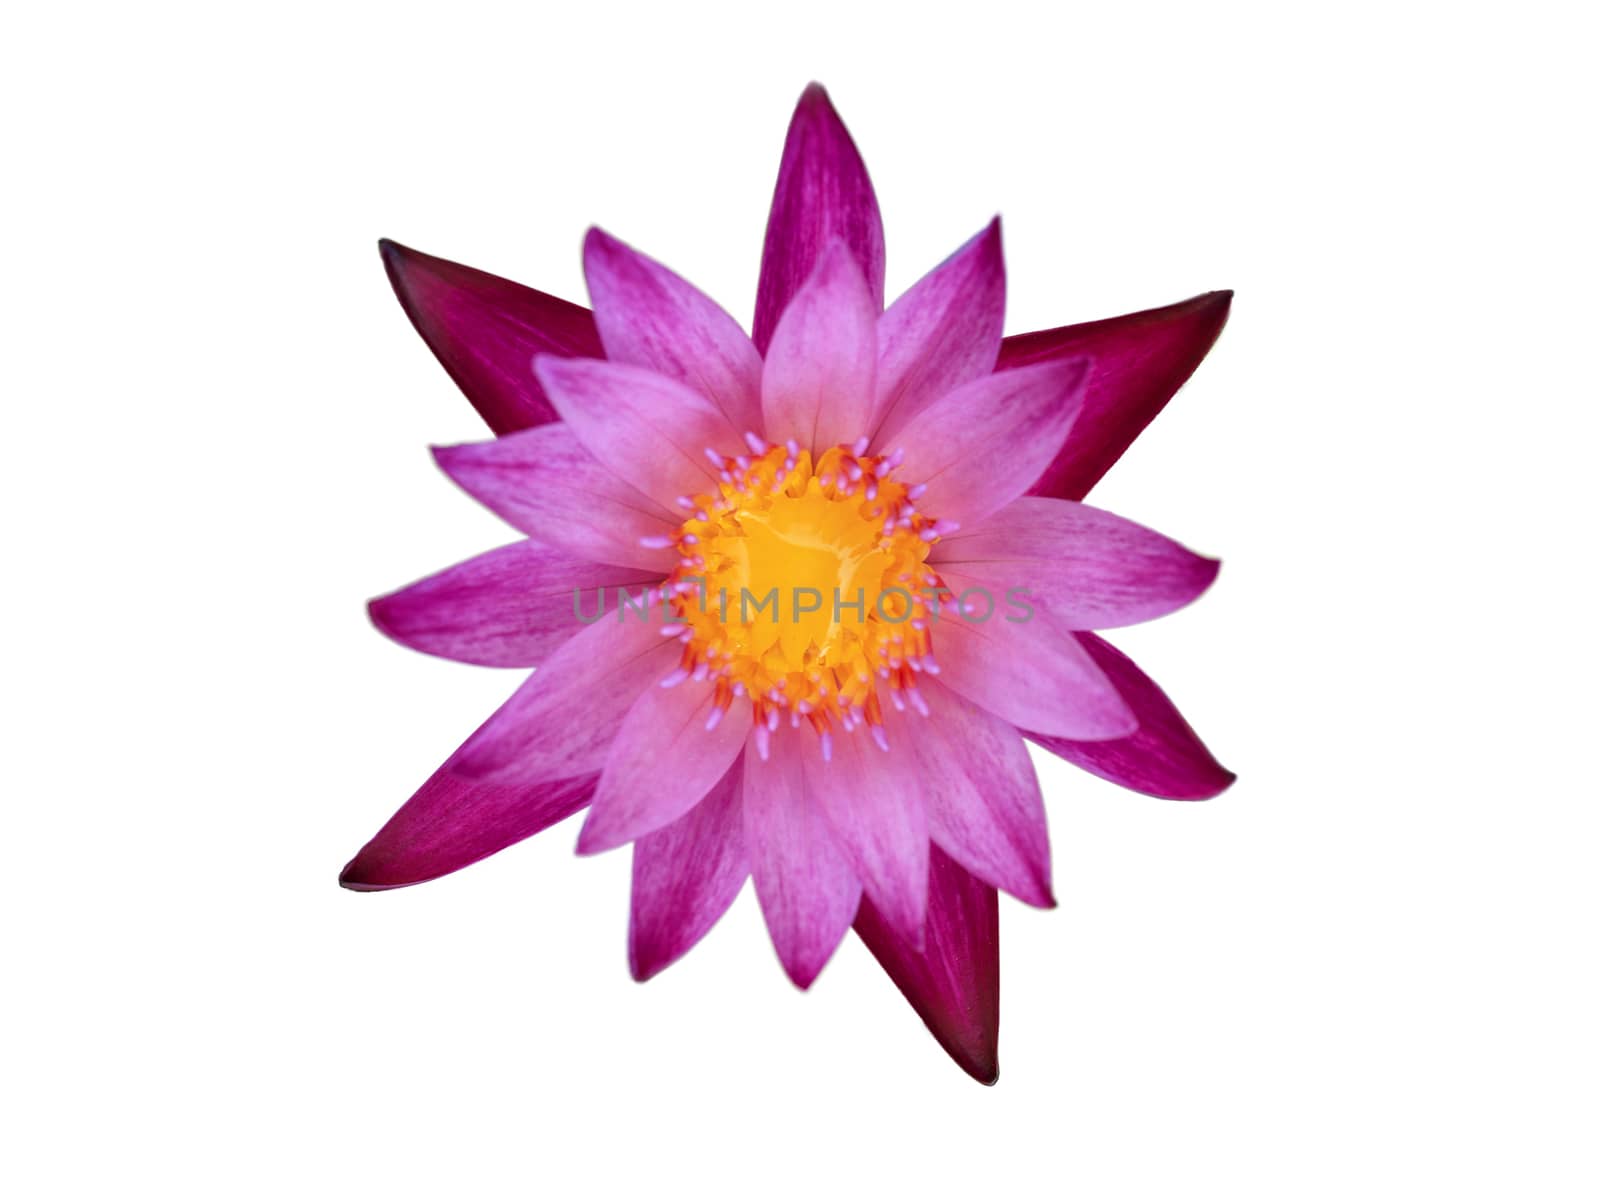 Top view purple lotus and yellow pollen, isolated on white background